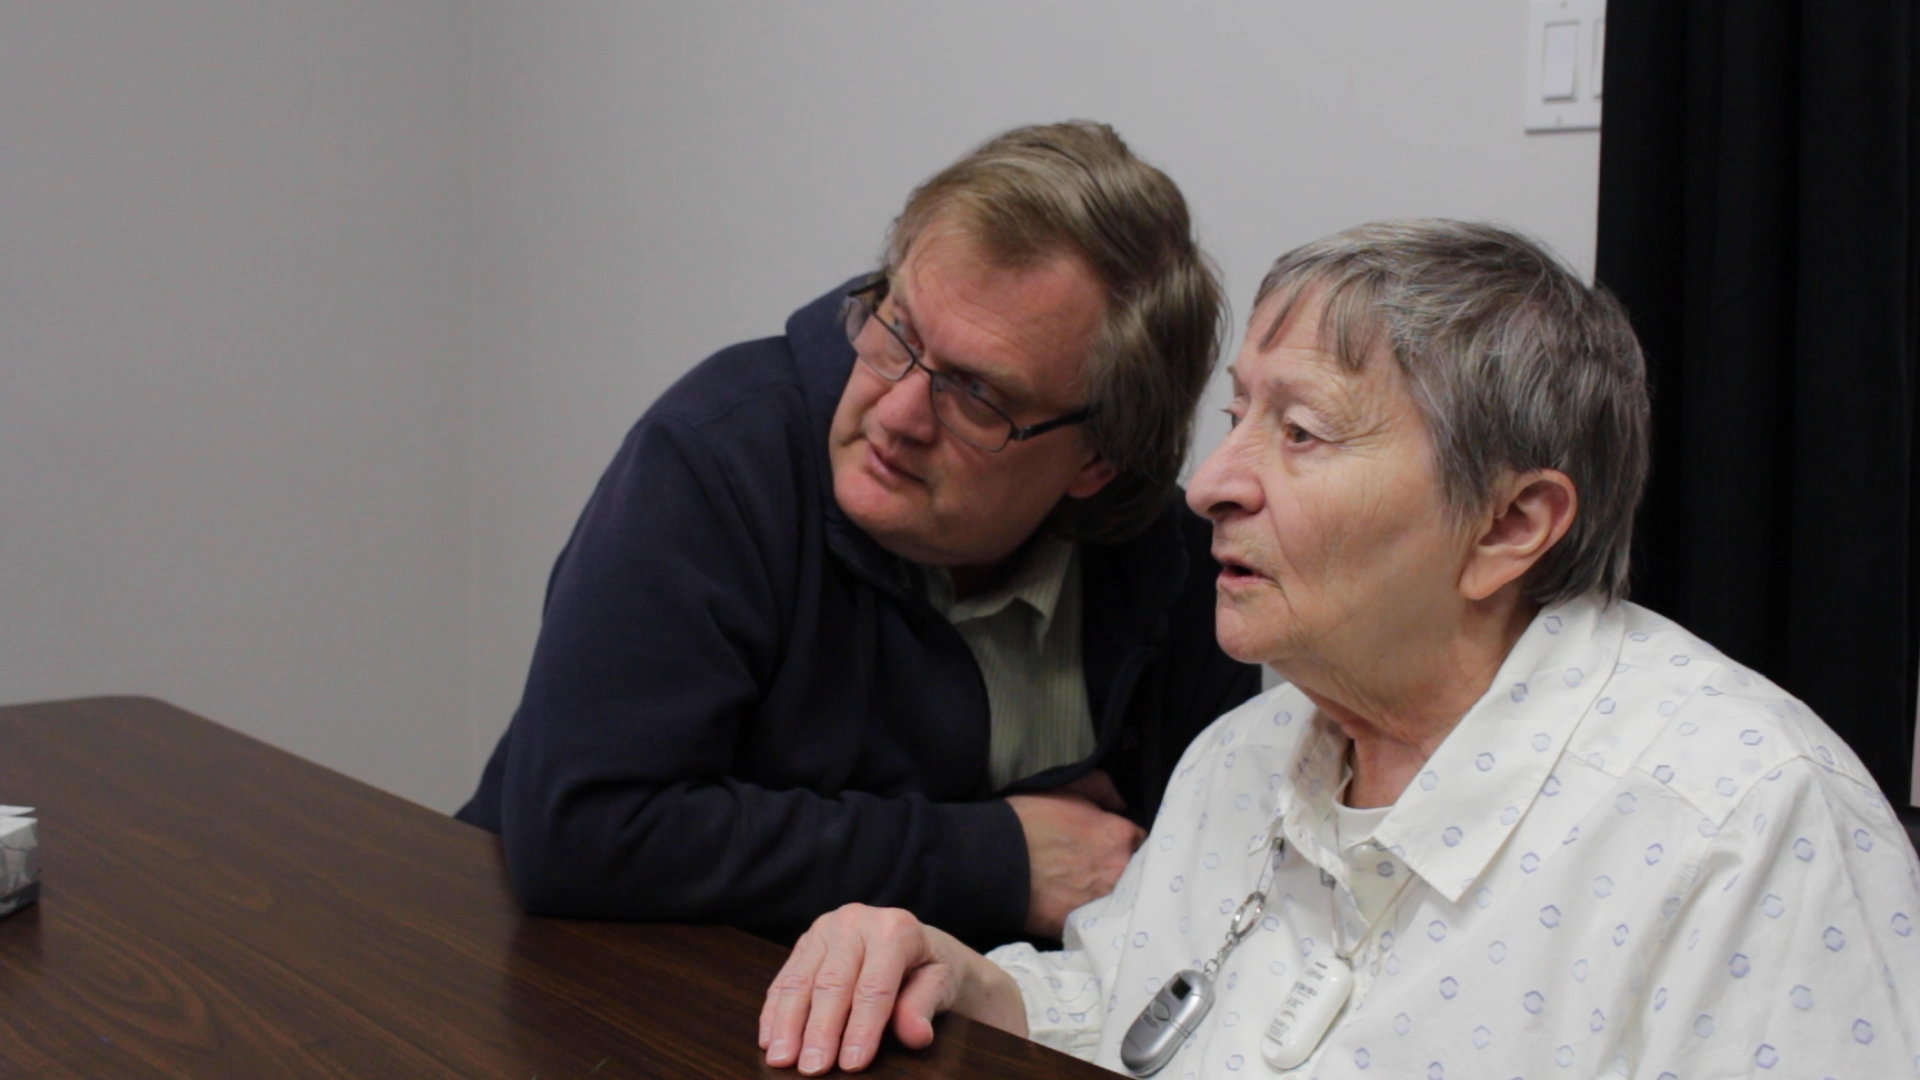 Christine, a white woman in her 70s, wearing a light patterned shir, sitting at a table. Her intervenor, a white man wearing a black hoodie and glasses, leans in close to her.